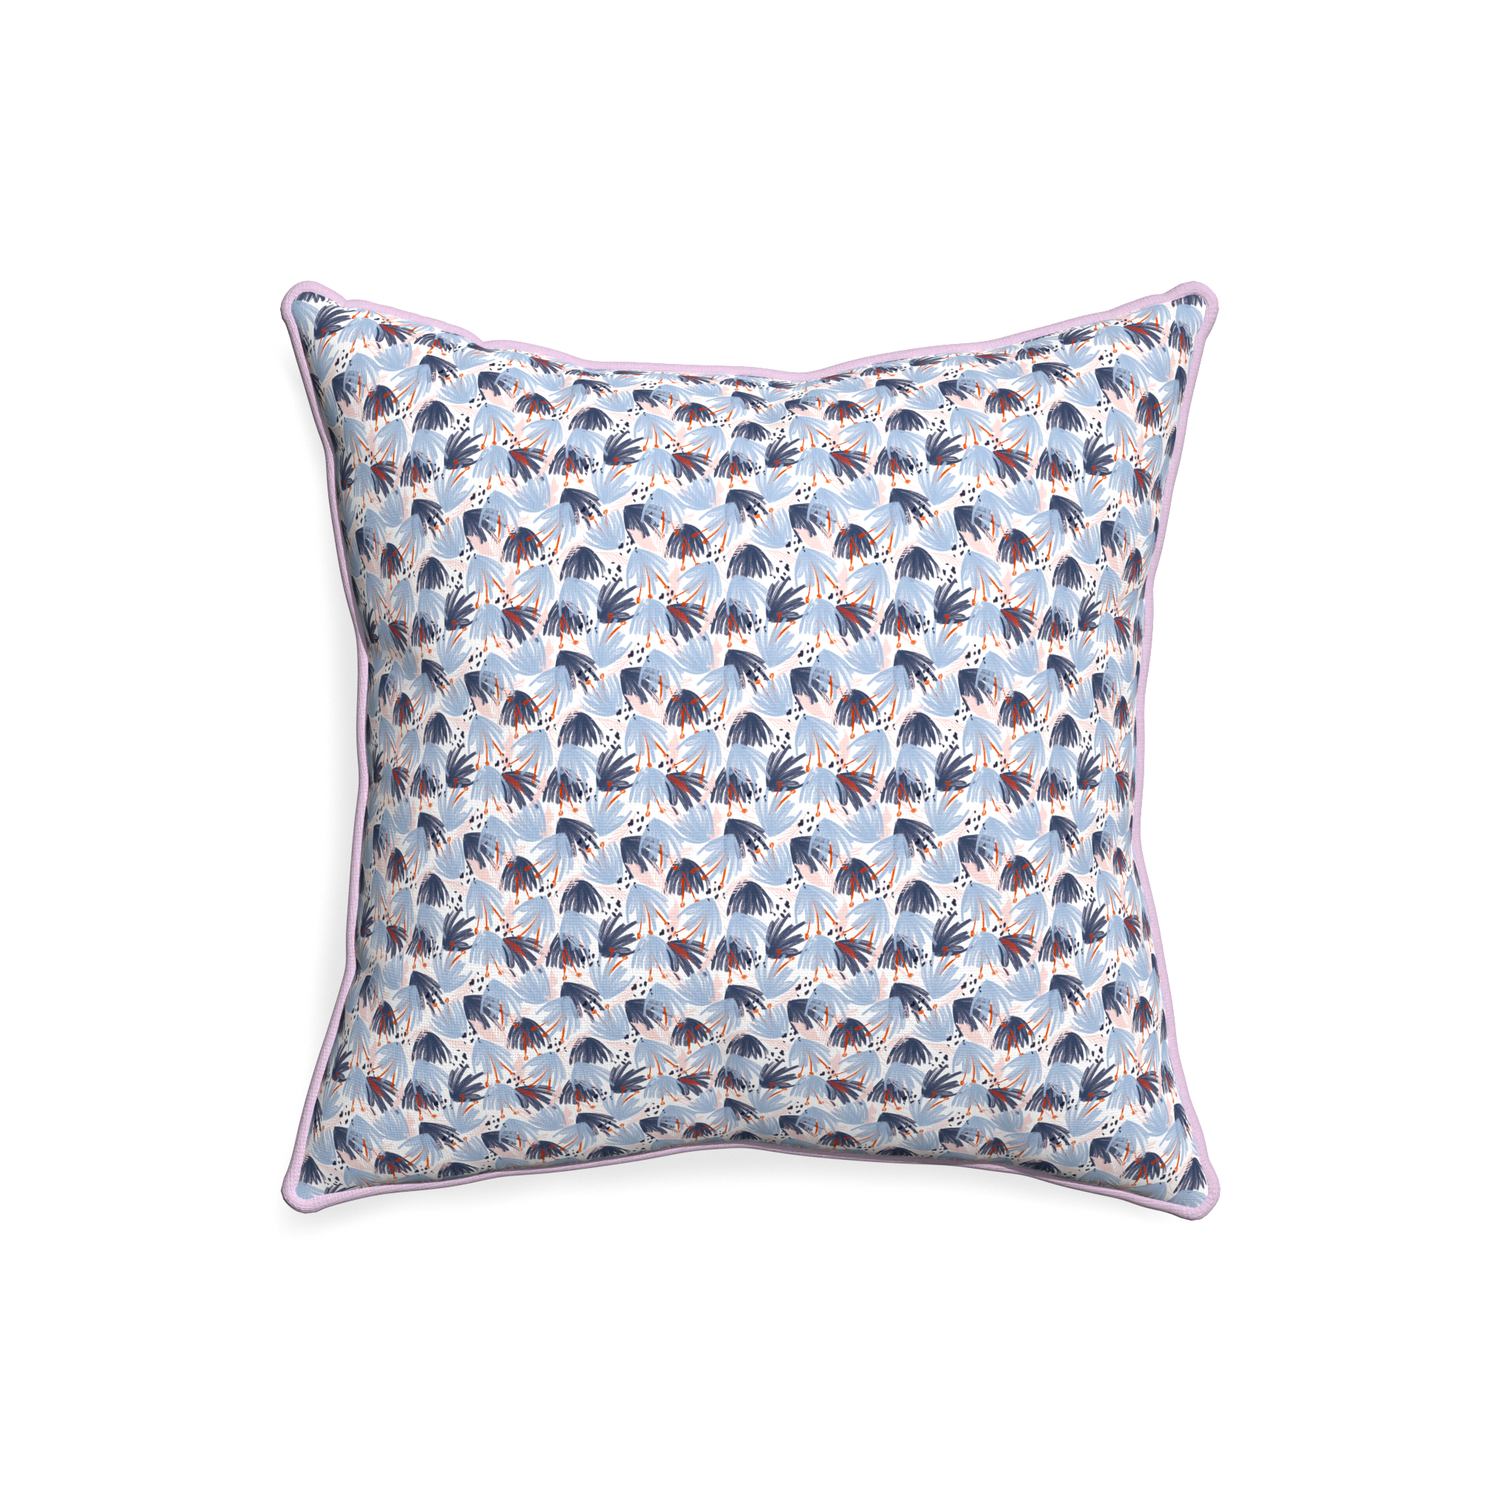 20-square eden blue custom pillow with l piping on white background